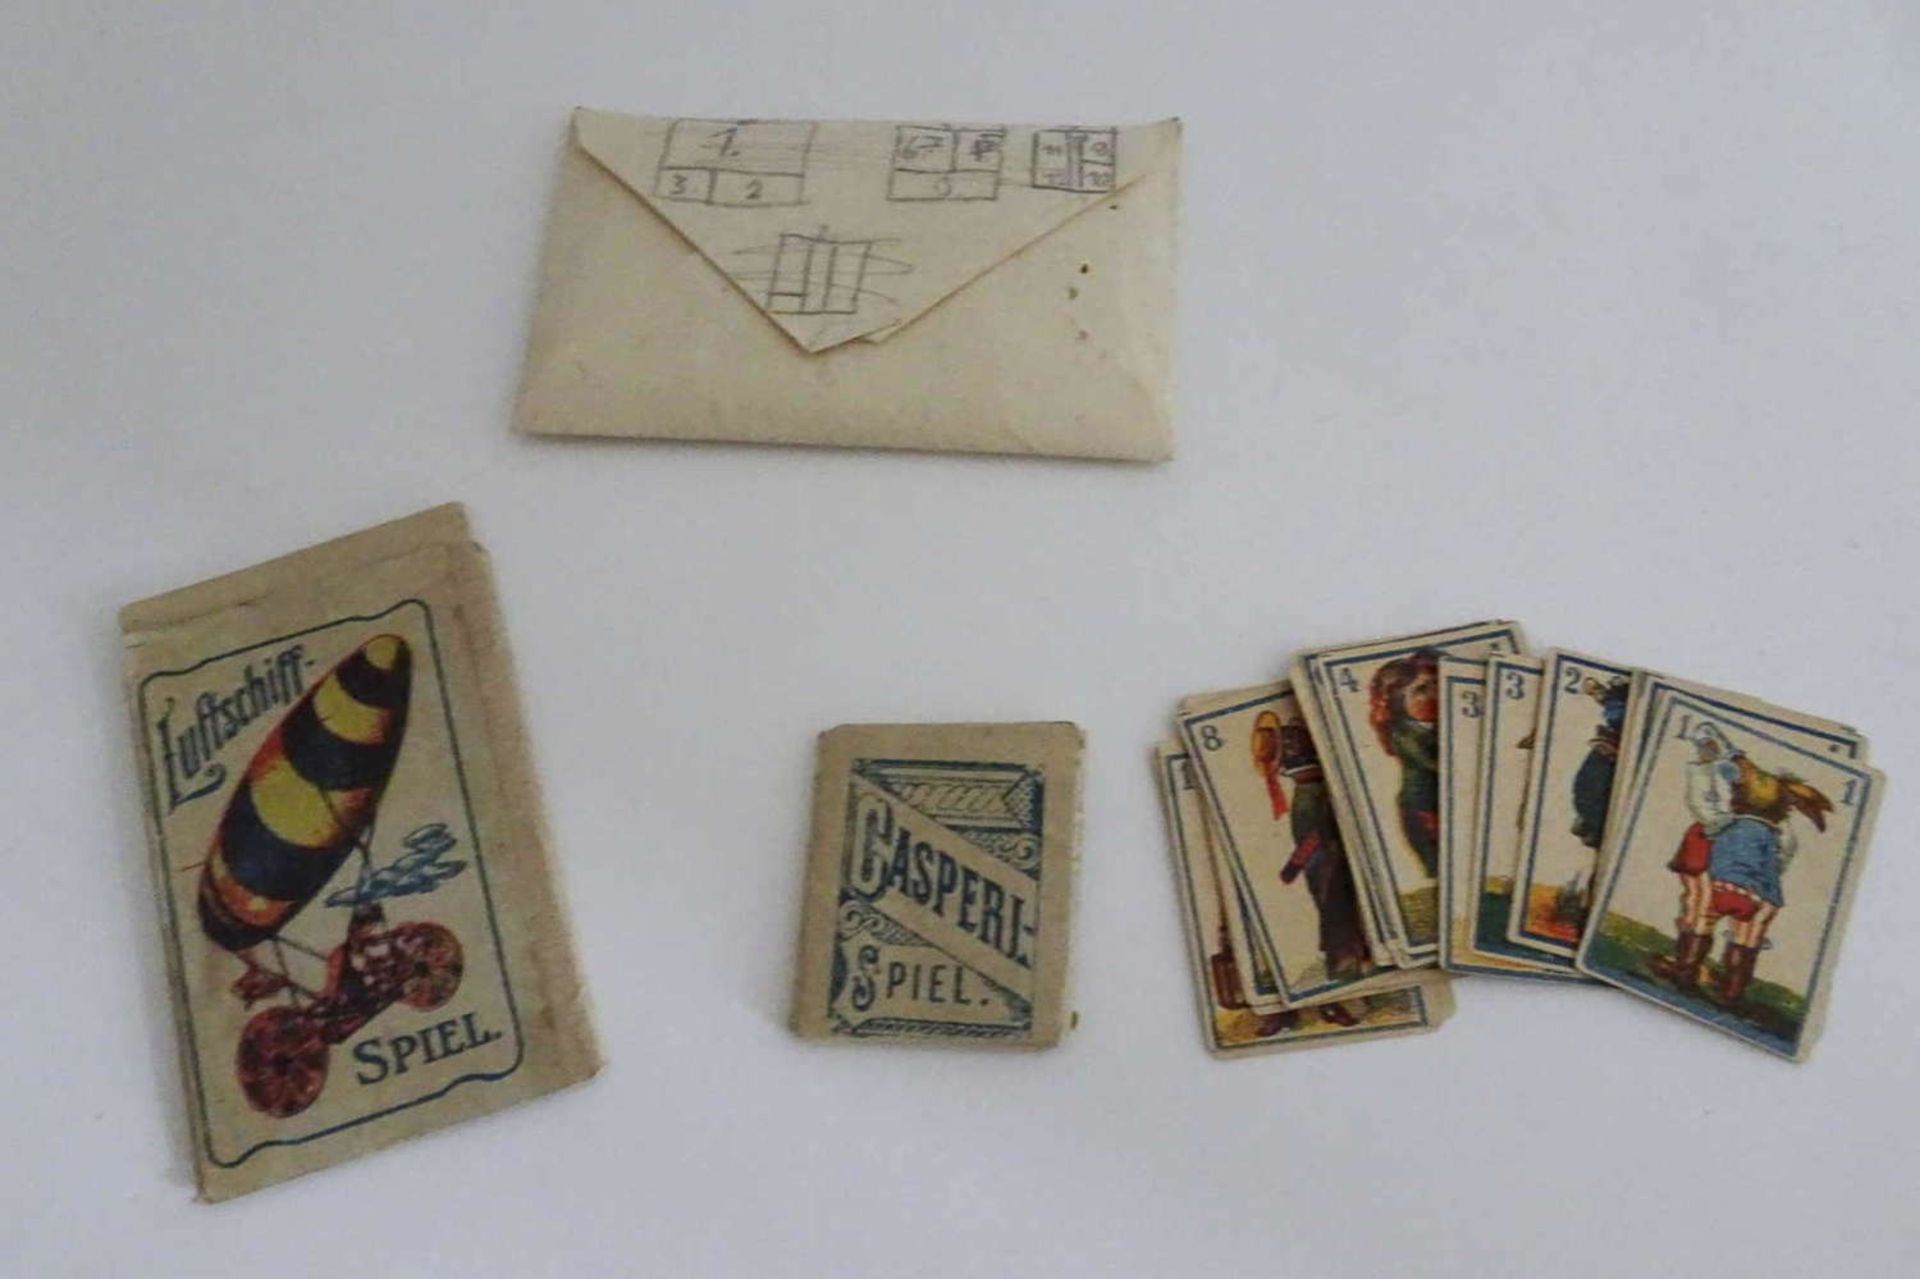 Envelope with game cards in mini format, 1x "Airship game", 1 x "Casperl game", and a small card - Bild 2 aus 2